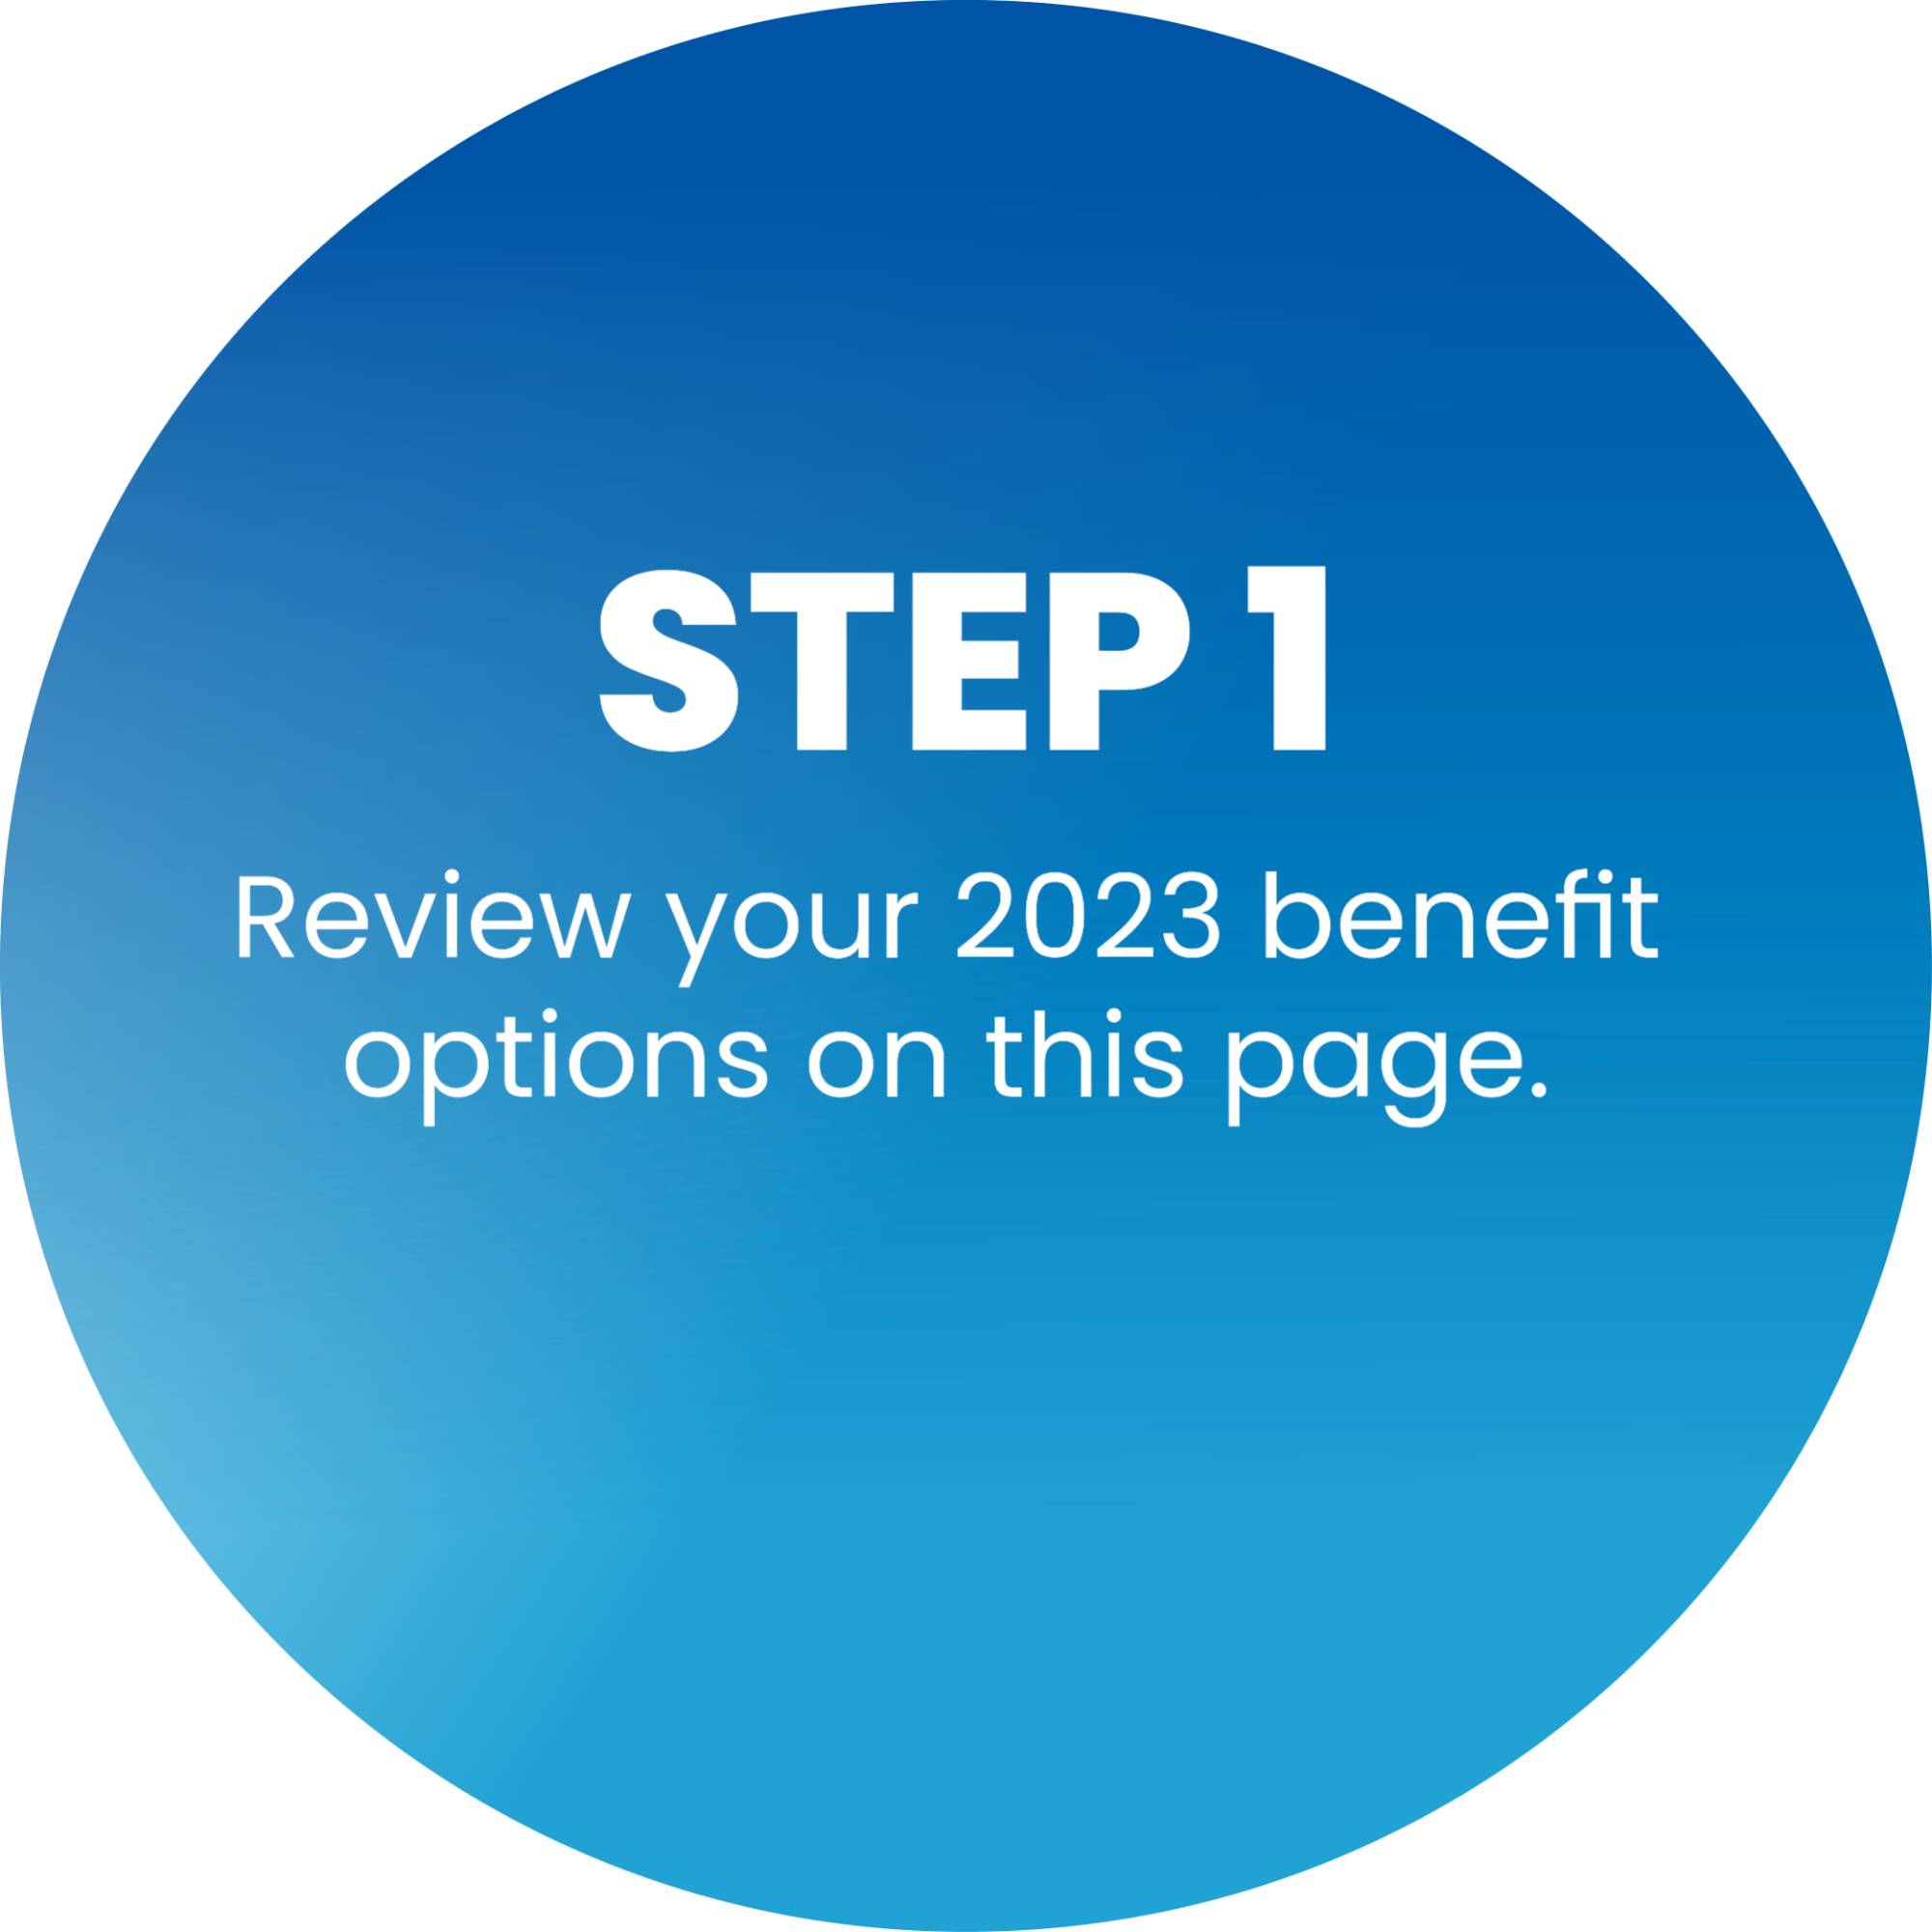 Step 1: Review your 2023 benefit options on this page.